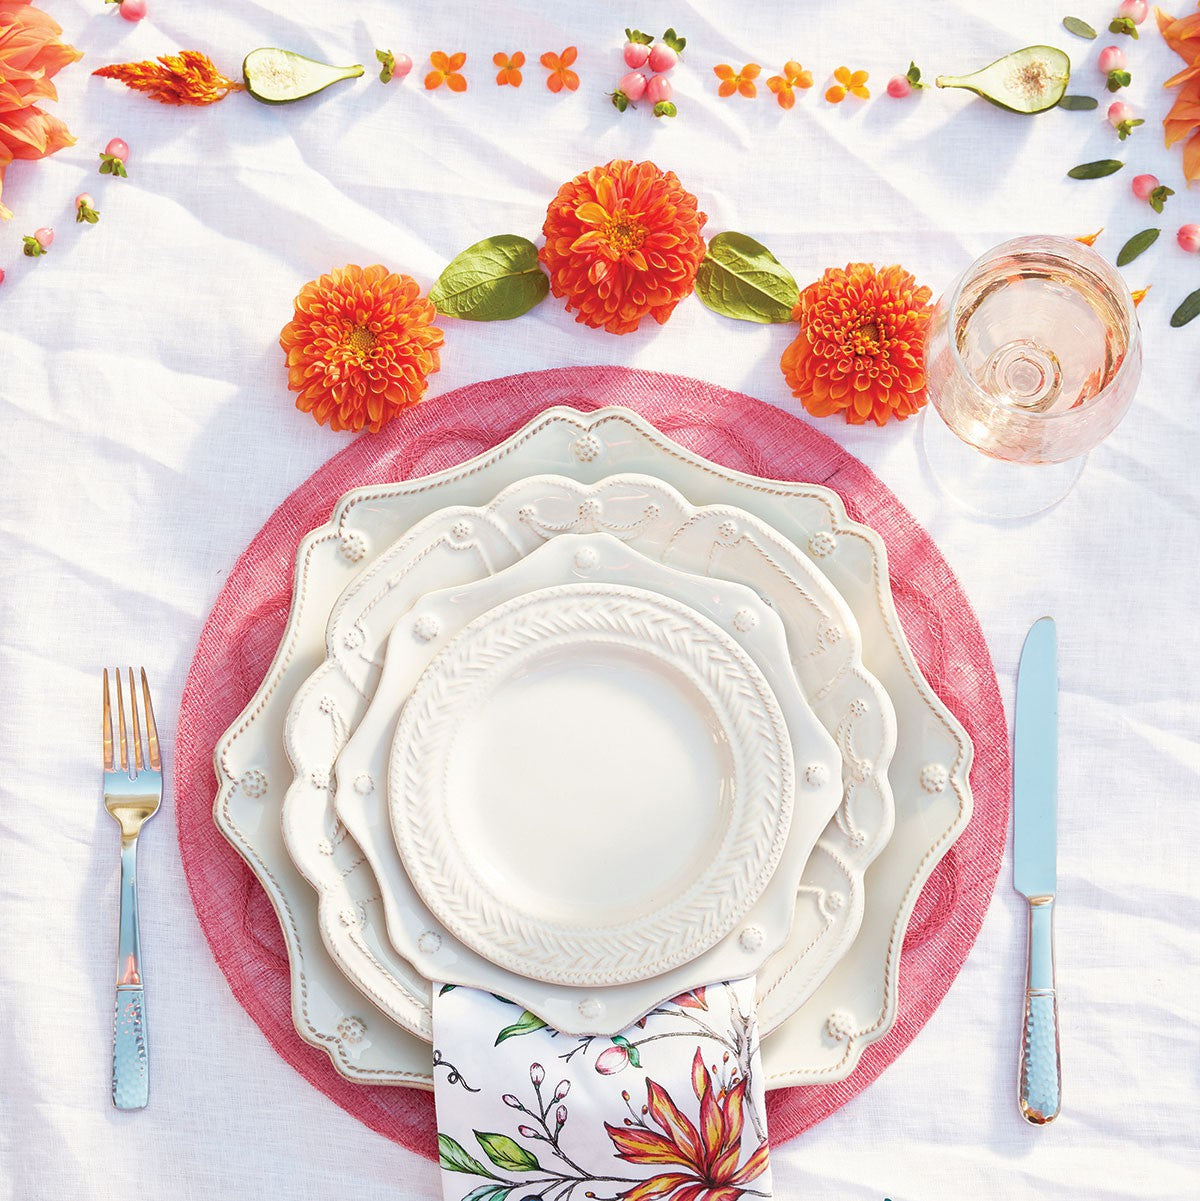 four piece place setting of juliska dinnerware displayed on a pink charger with flatware, floral napkin and orange flowers on a white tablecloth